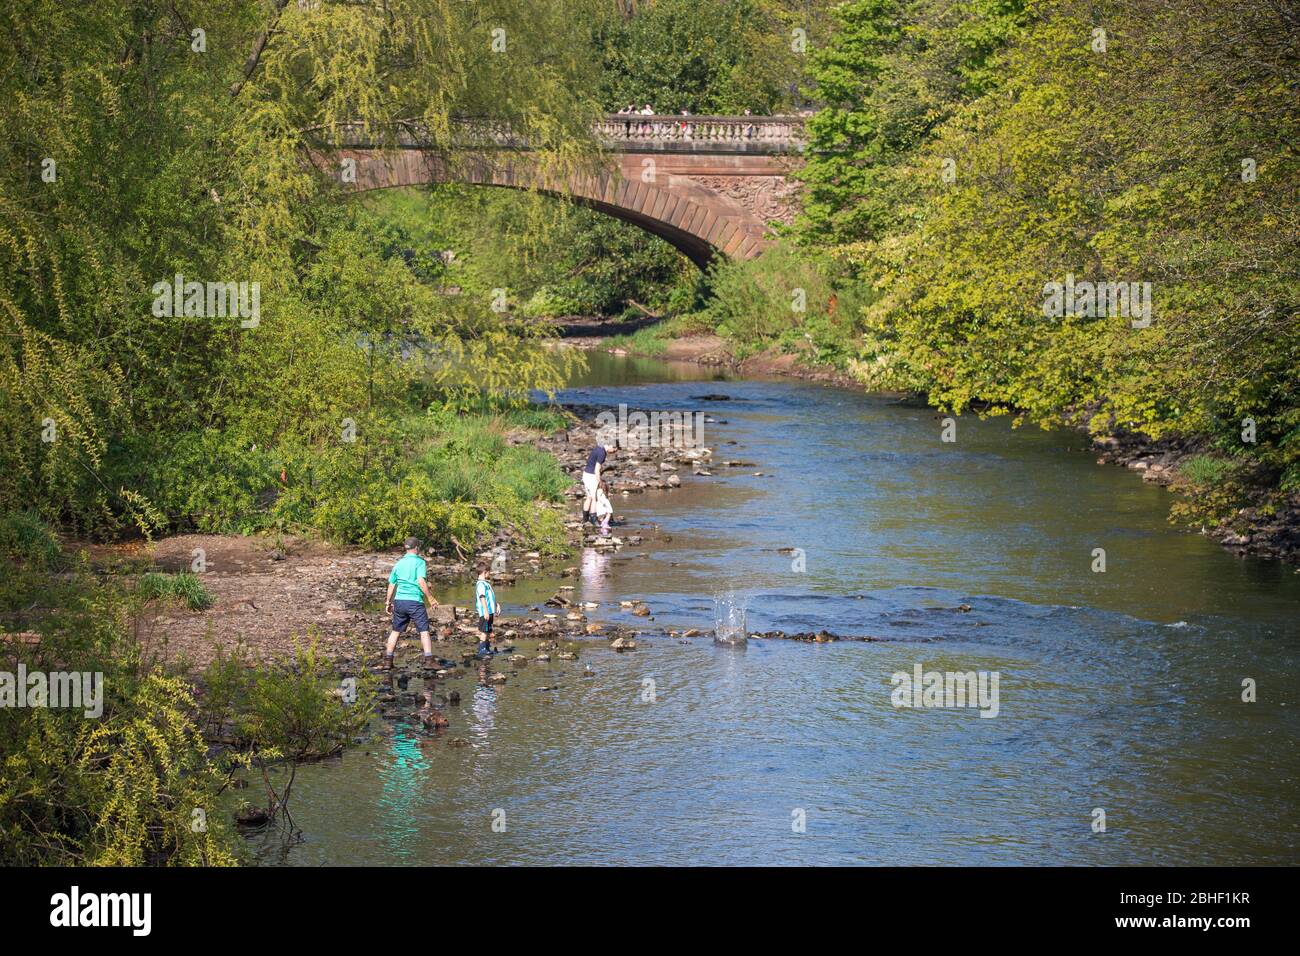 Glasgow, UK. 25th Apr, 2020. Pictured: People seen playing in the water of the River Kelvin which meanders through the edge of Kelvingrove Park. Scenes from the first weekend of the extended lockdown from KelvinGrove Park in Glasgow's West End during a very hot and sunny Saturday. Credit: Colin Fisher/Alamy Live News Stock Photo